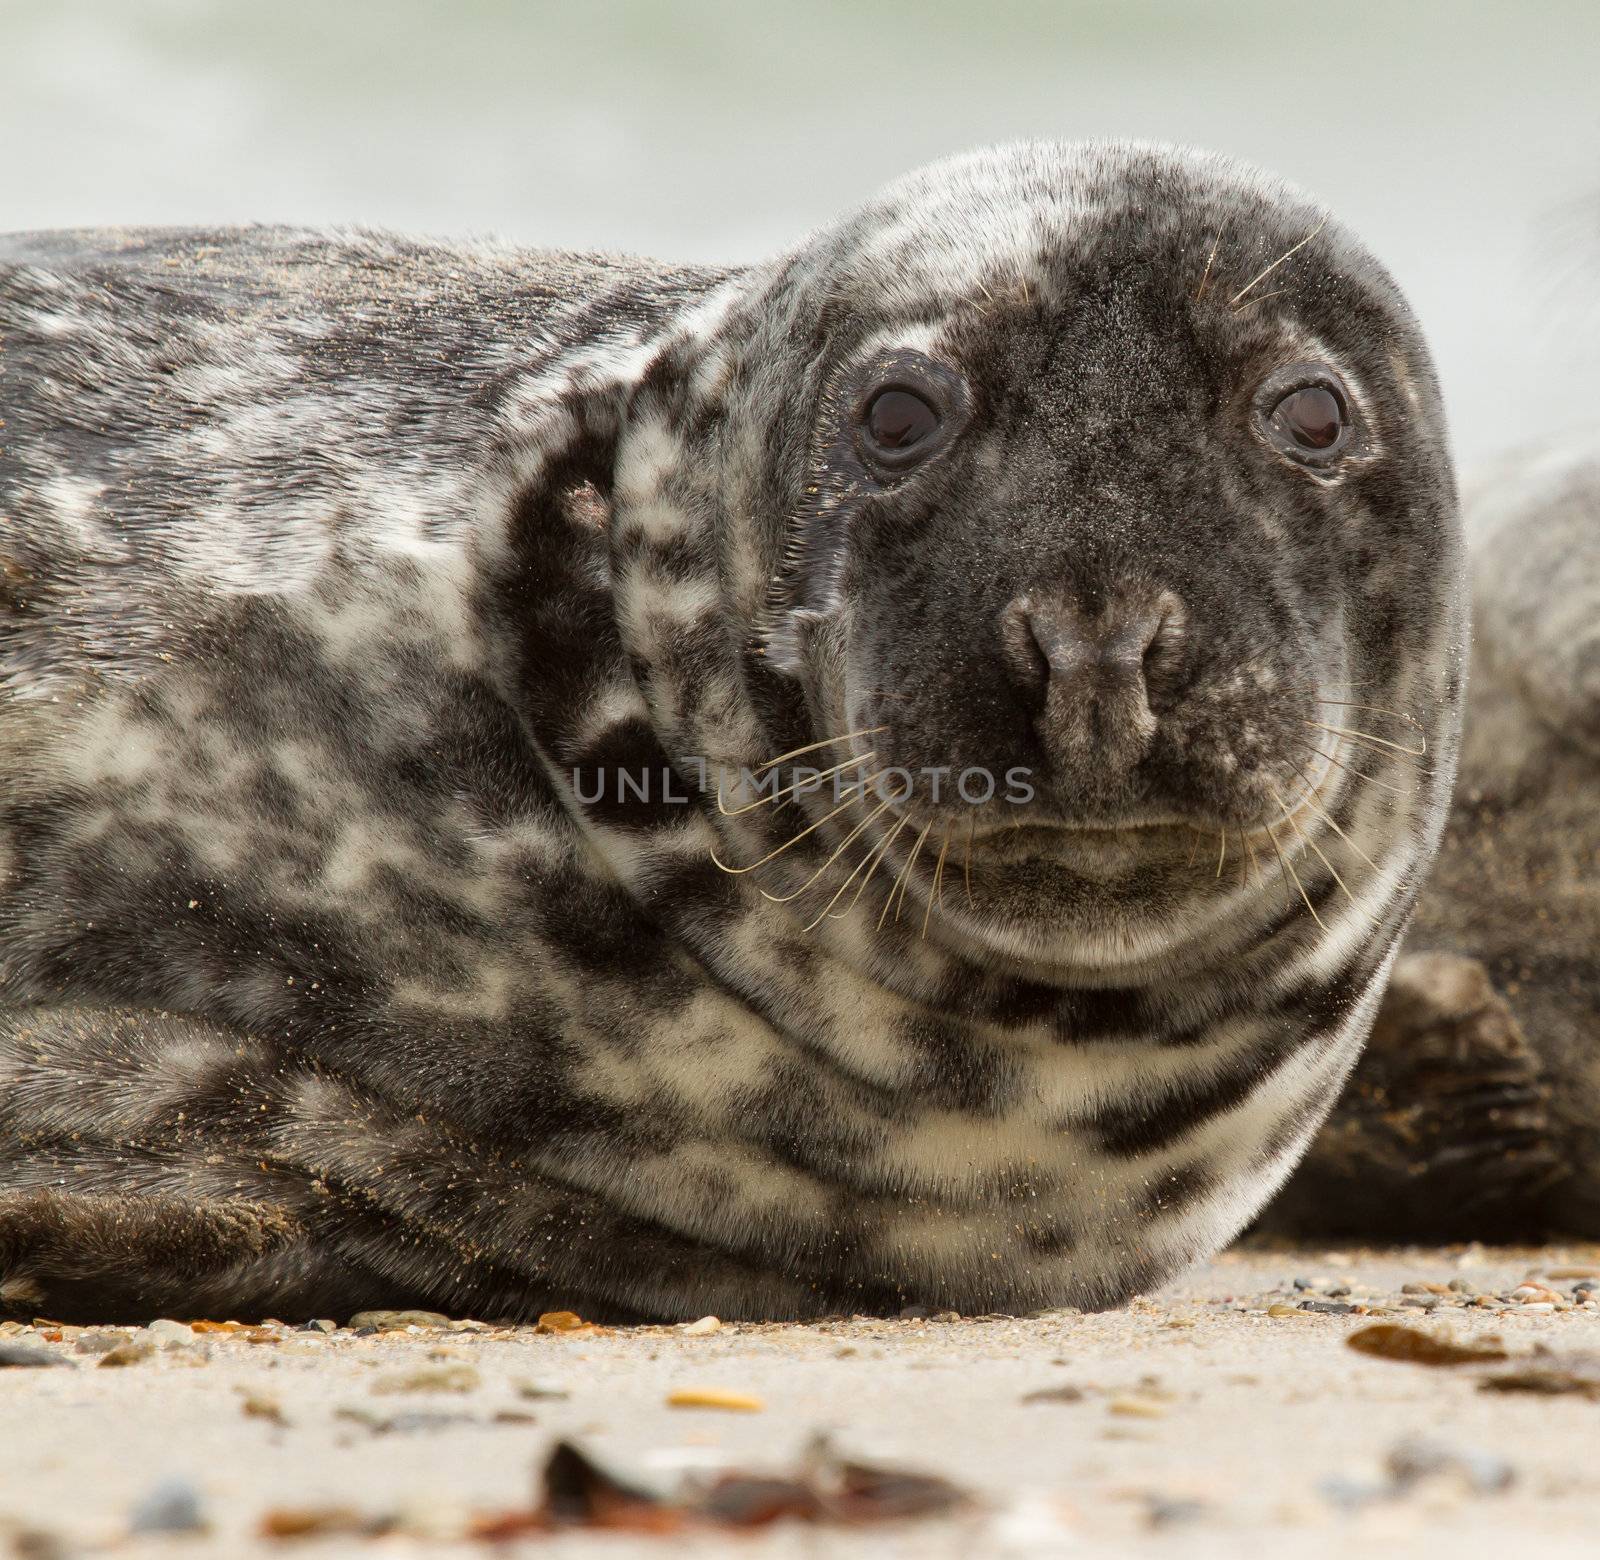 A grey seal by michaklootwijk